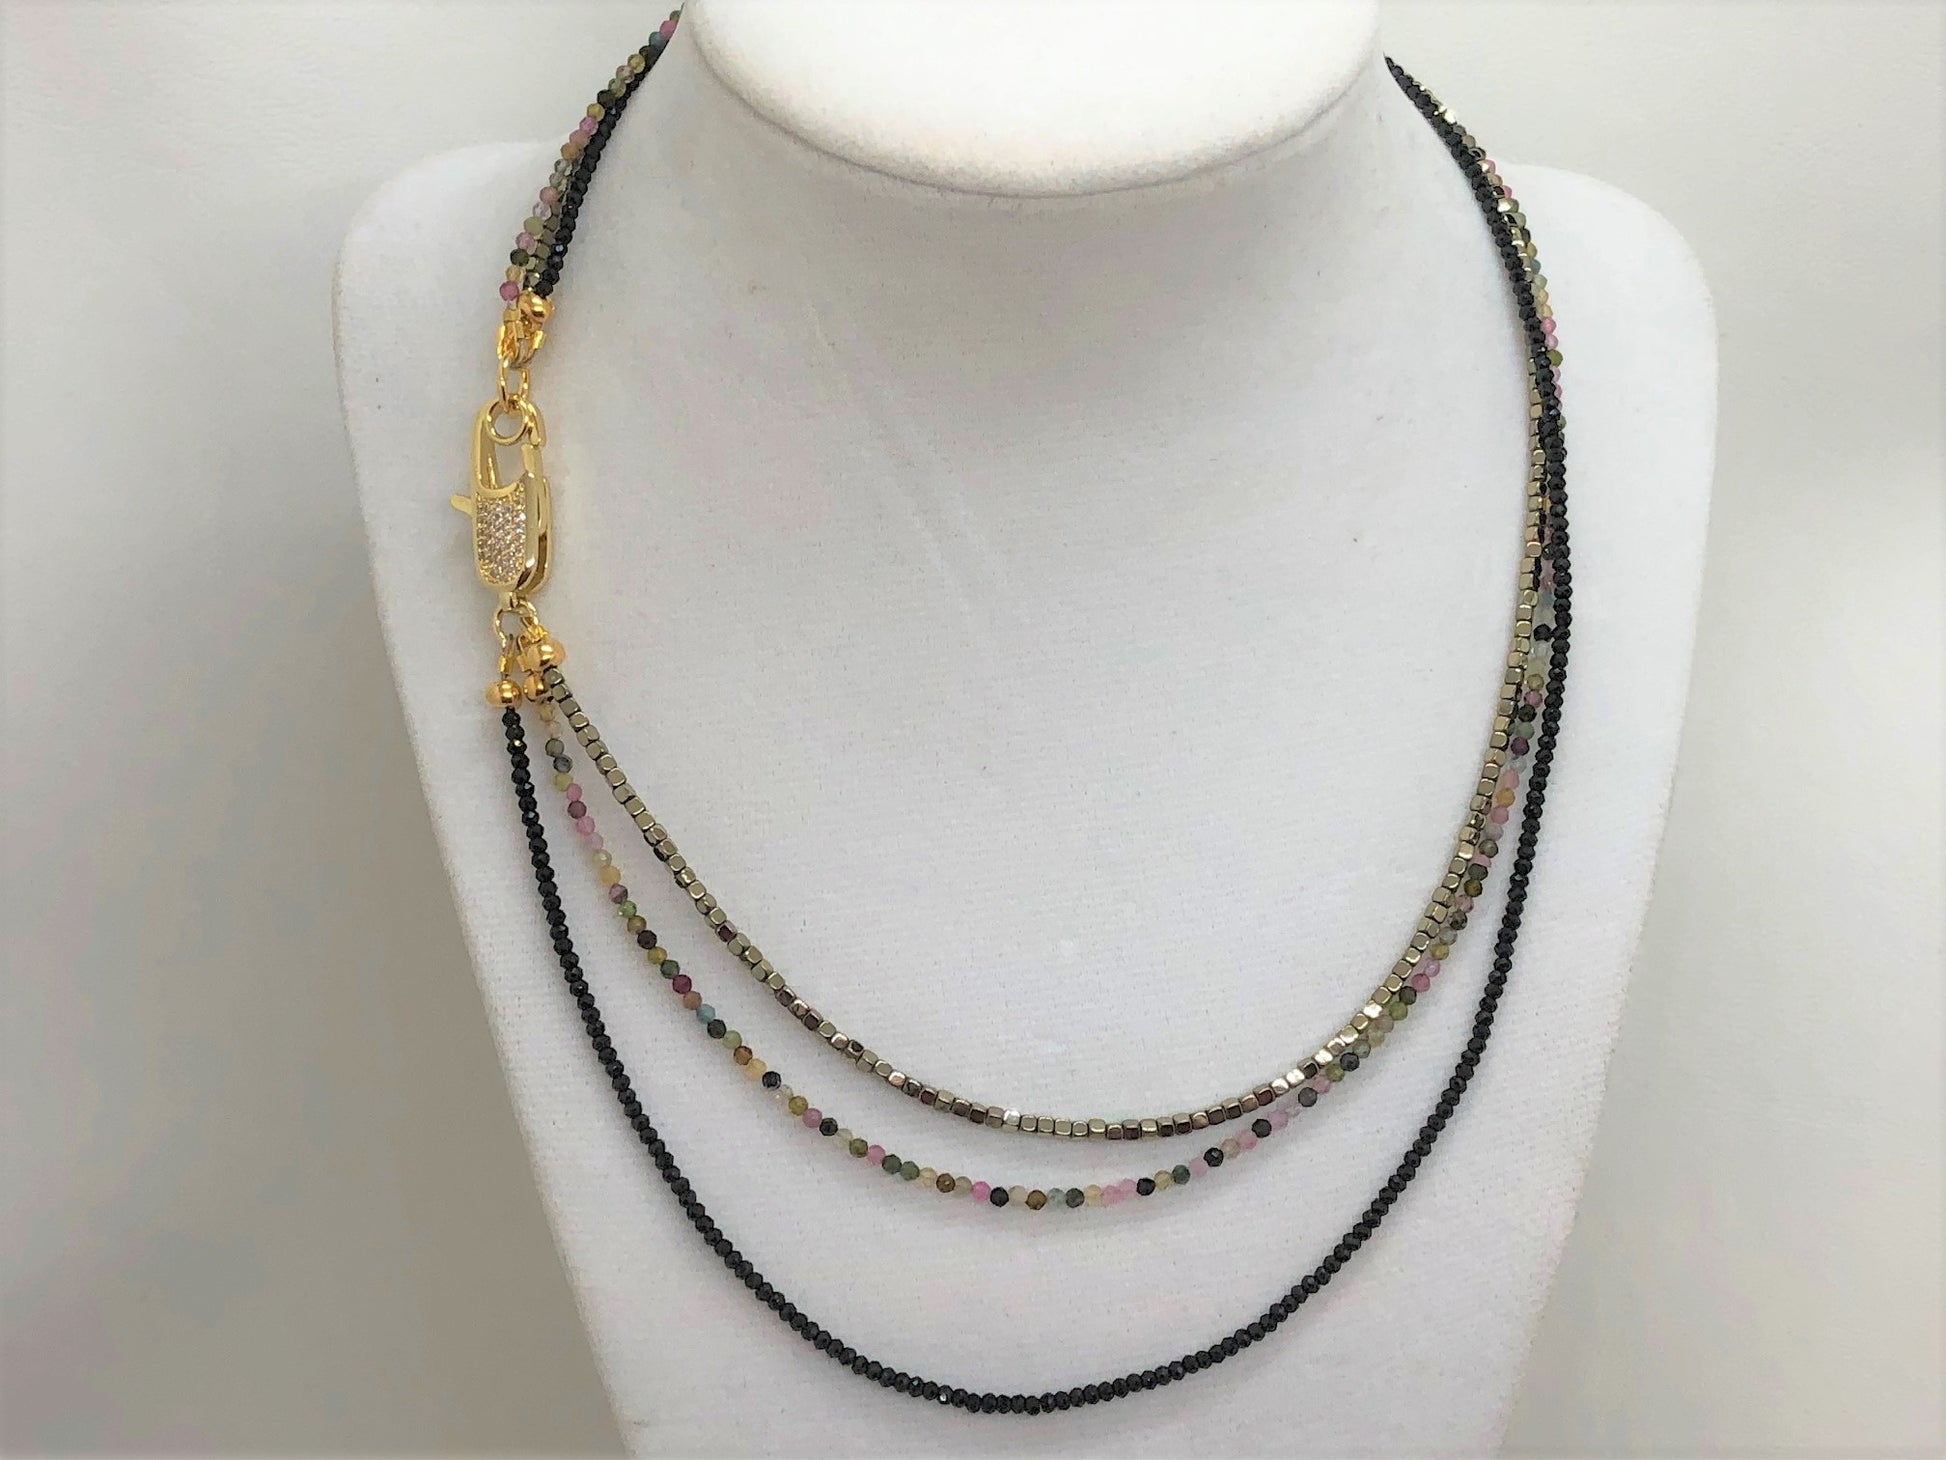 Triple Gemstone Short Necklace with Tourmaline and Gold Hematite - Emmis Jewelry, Necklace, [product_color]